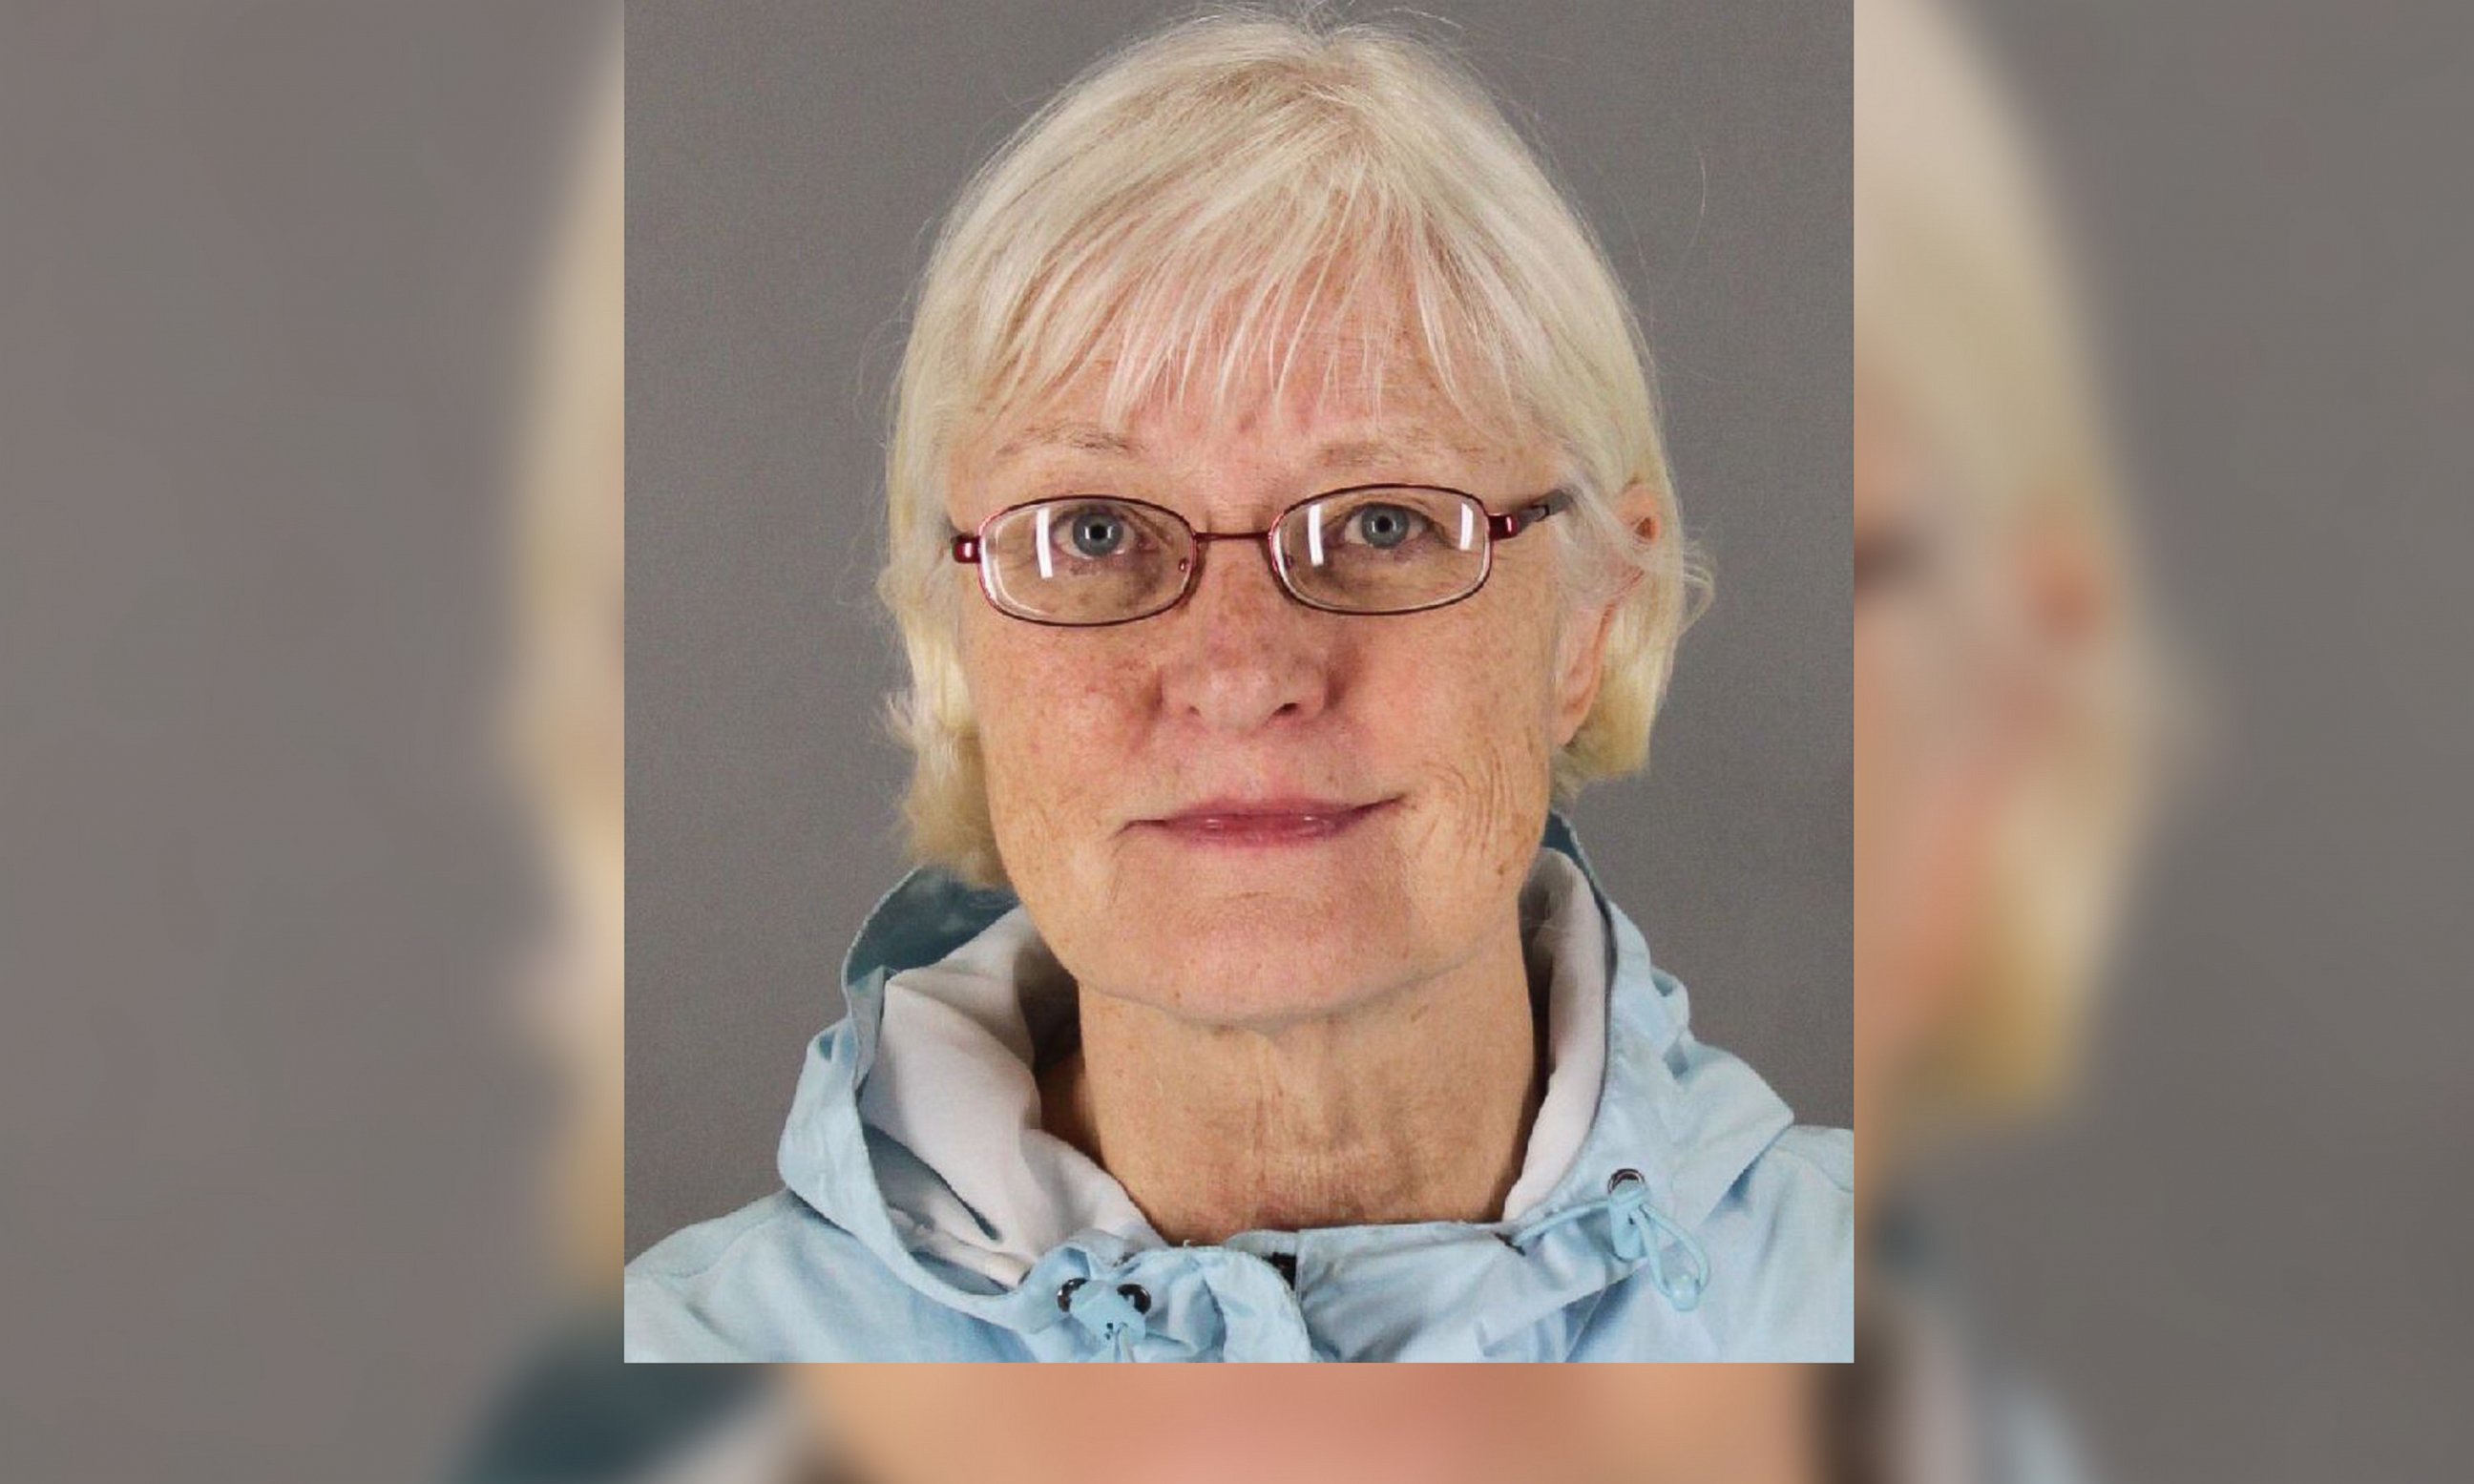 PHOTO: Marilyn Jean Hartman, pictured here in a booking photo from an earlier incident, was arrested by police after stowing away on a Southwest Airlines flying from San Jose to Los Angeles on August 4, 2014.